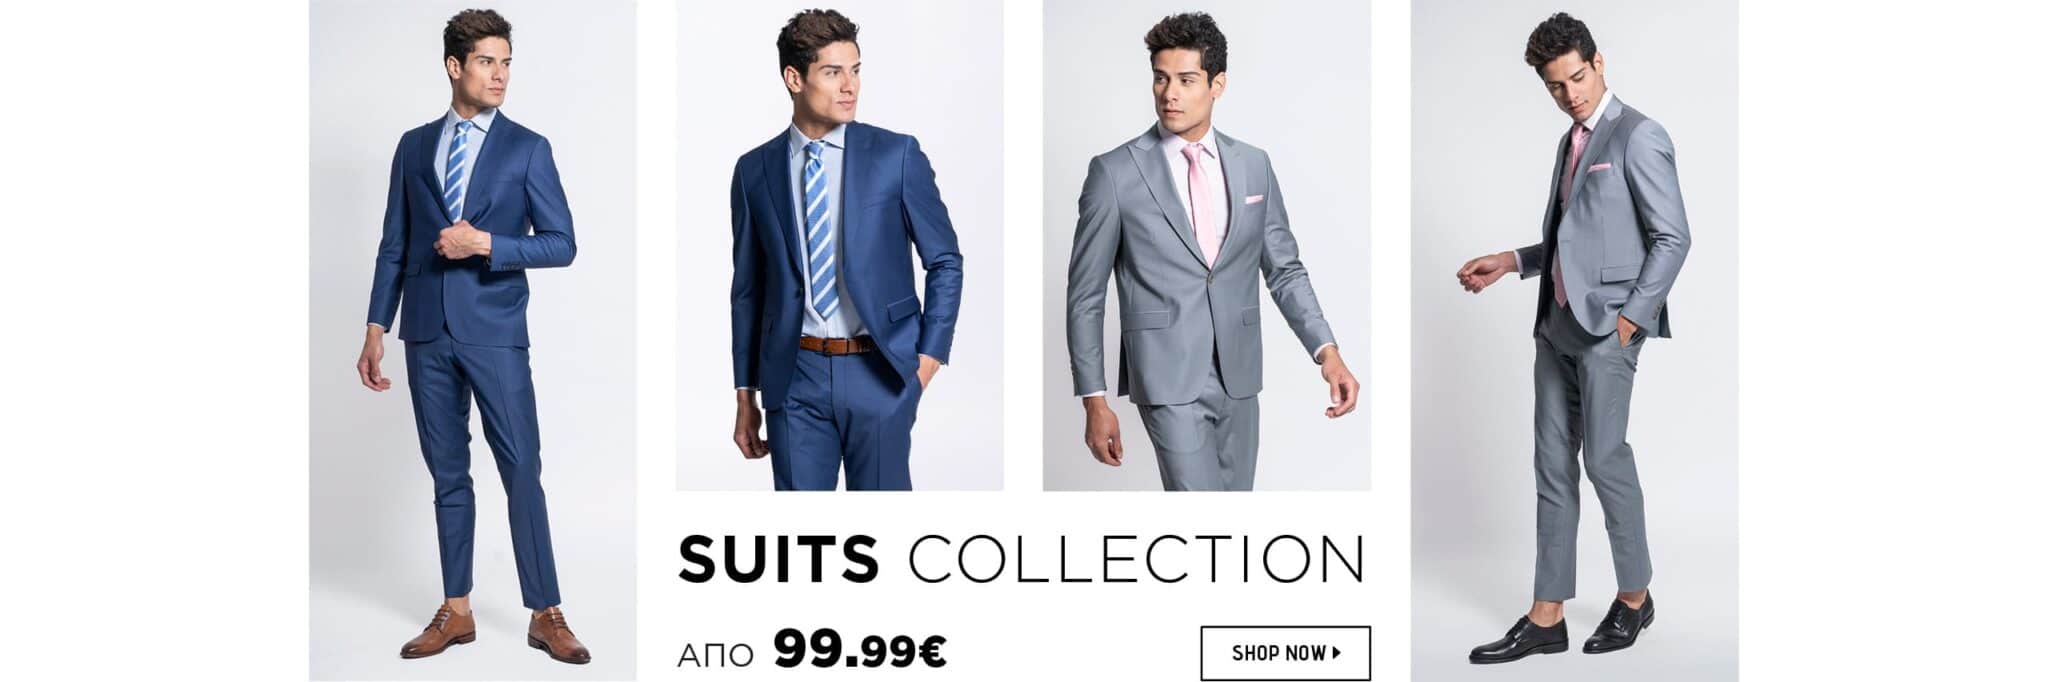 Prince Oliver Suits Collection 99.99€